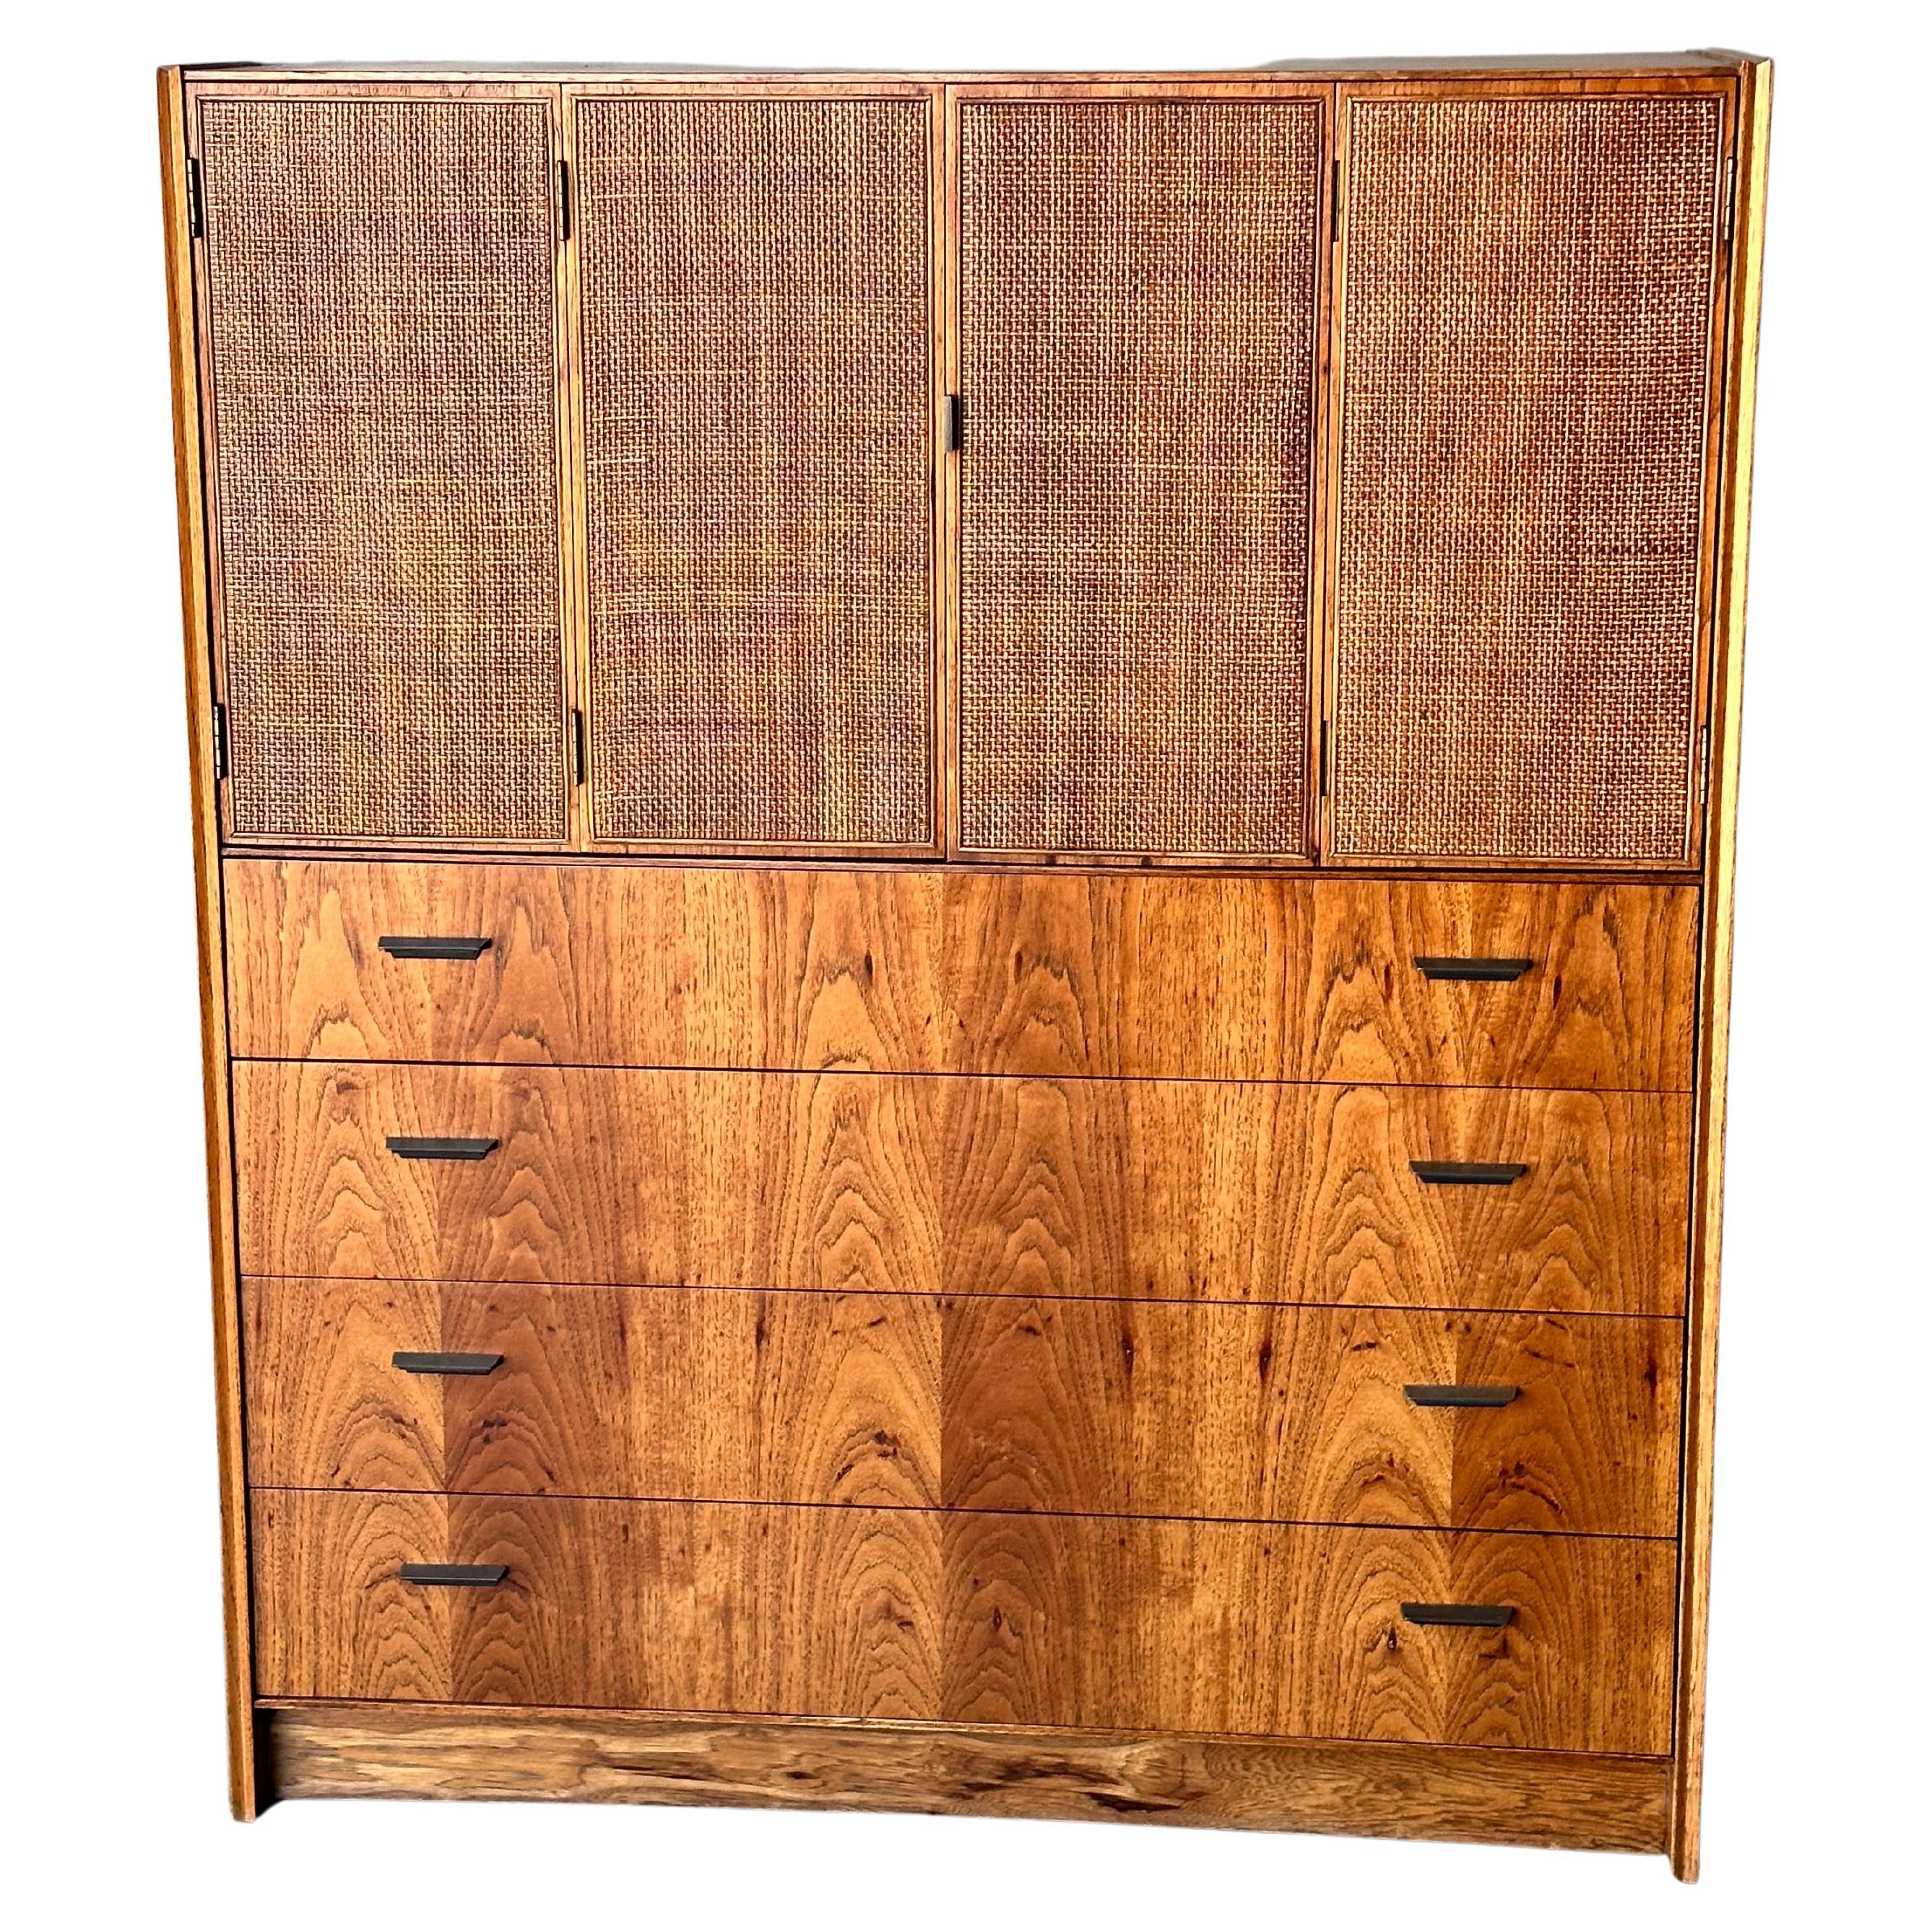 Extremely rare and stunning vintage high boy dresser by Jack Cartwright for Founders Furniture. Features gorgeous Pecan wood construction with cane front doors and sculpted drawer pulls. Cartwright is often thought of as the unsung hero of American